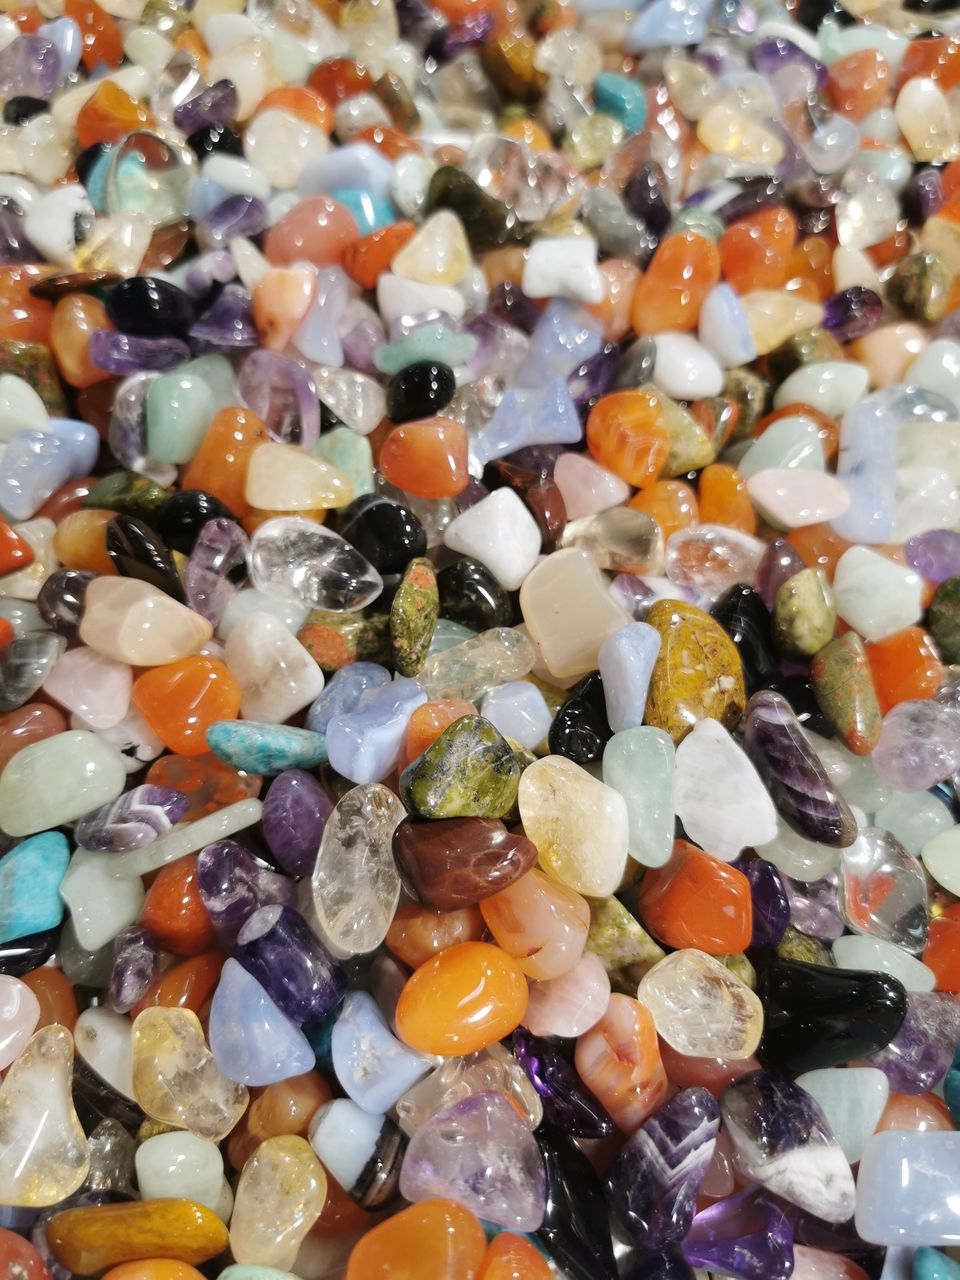 large group of objects, abundance, full frame, backgrounds, multi colored, no people, gemstone, pebble, jewelry, variation, high angle view, still life, stone, semi-precious gem, close-up, fashion accessory, jewellery, precious gem, indoors, rock